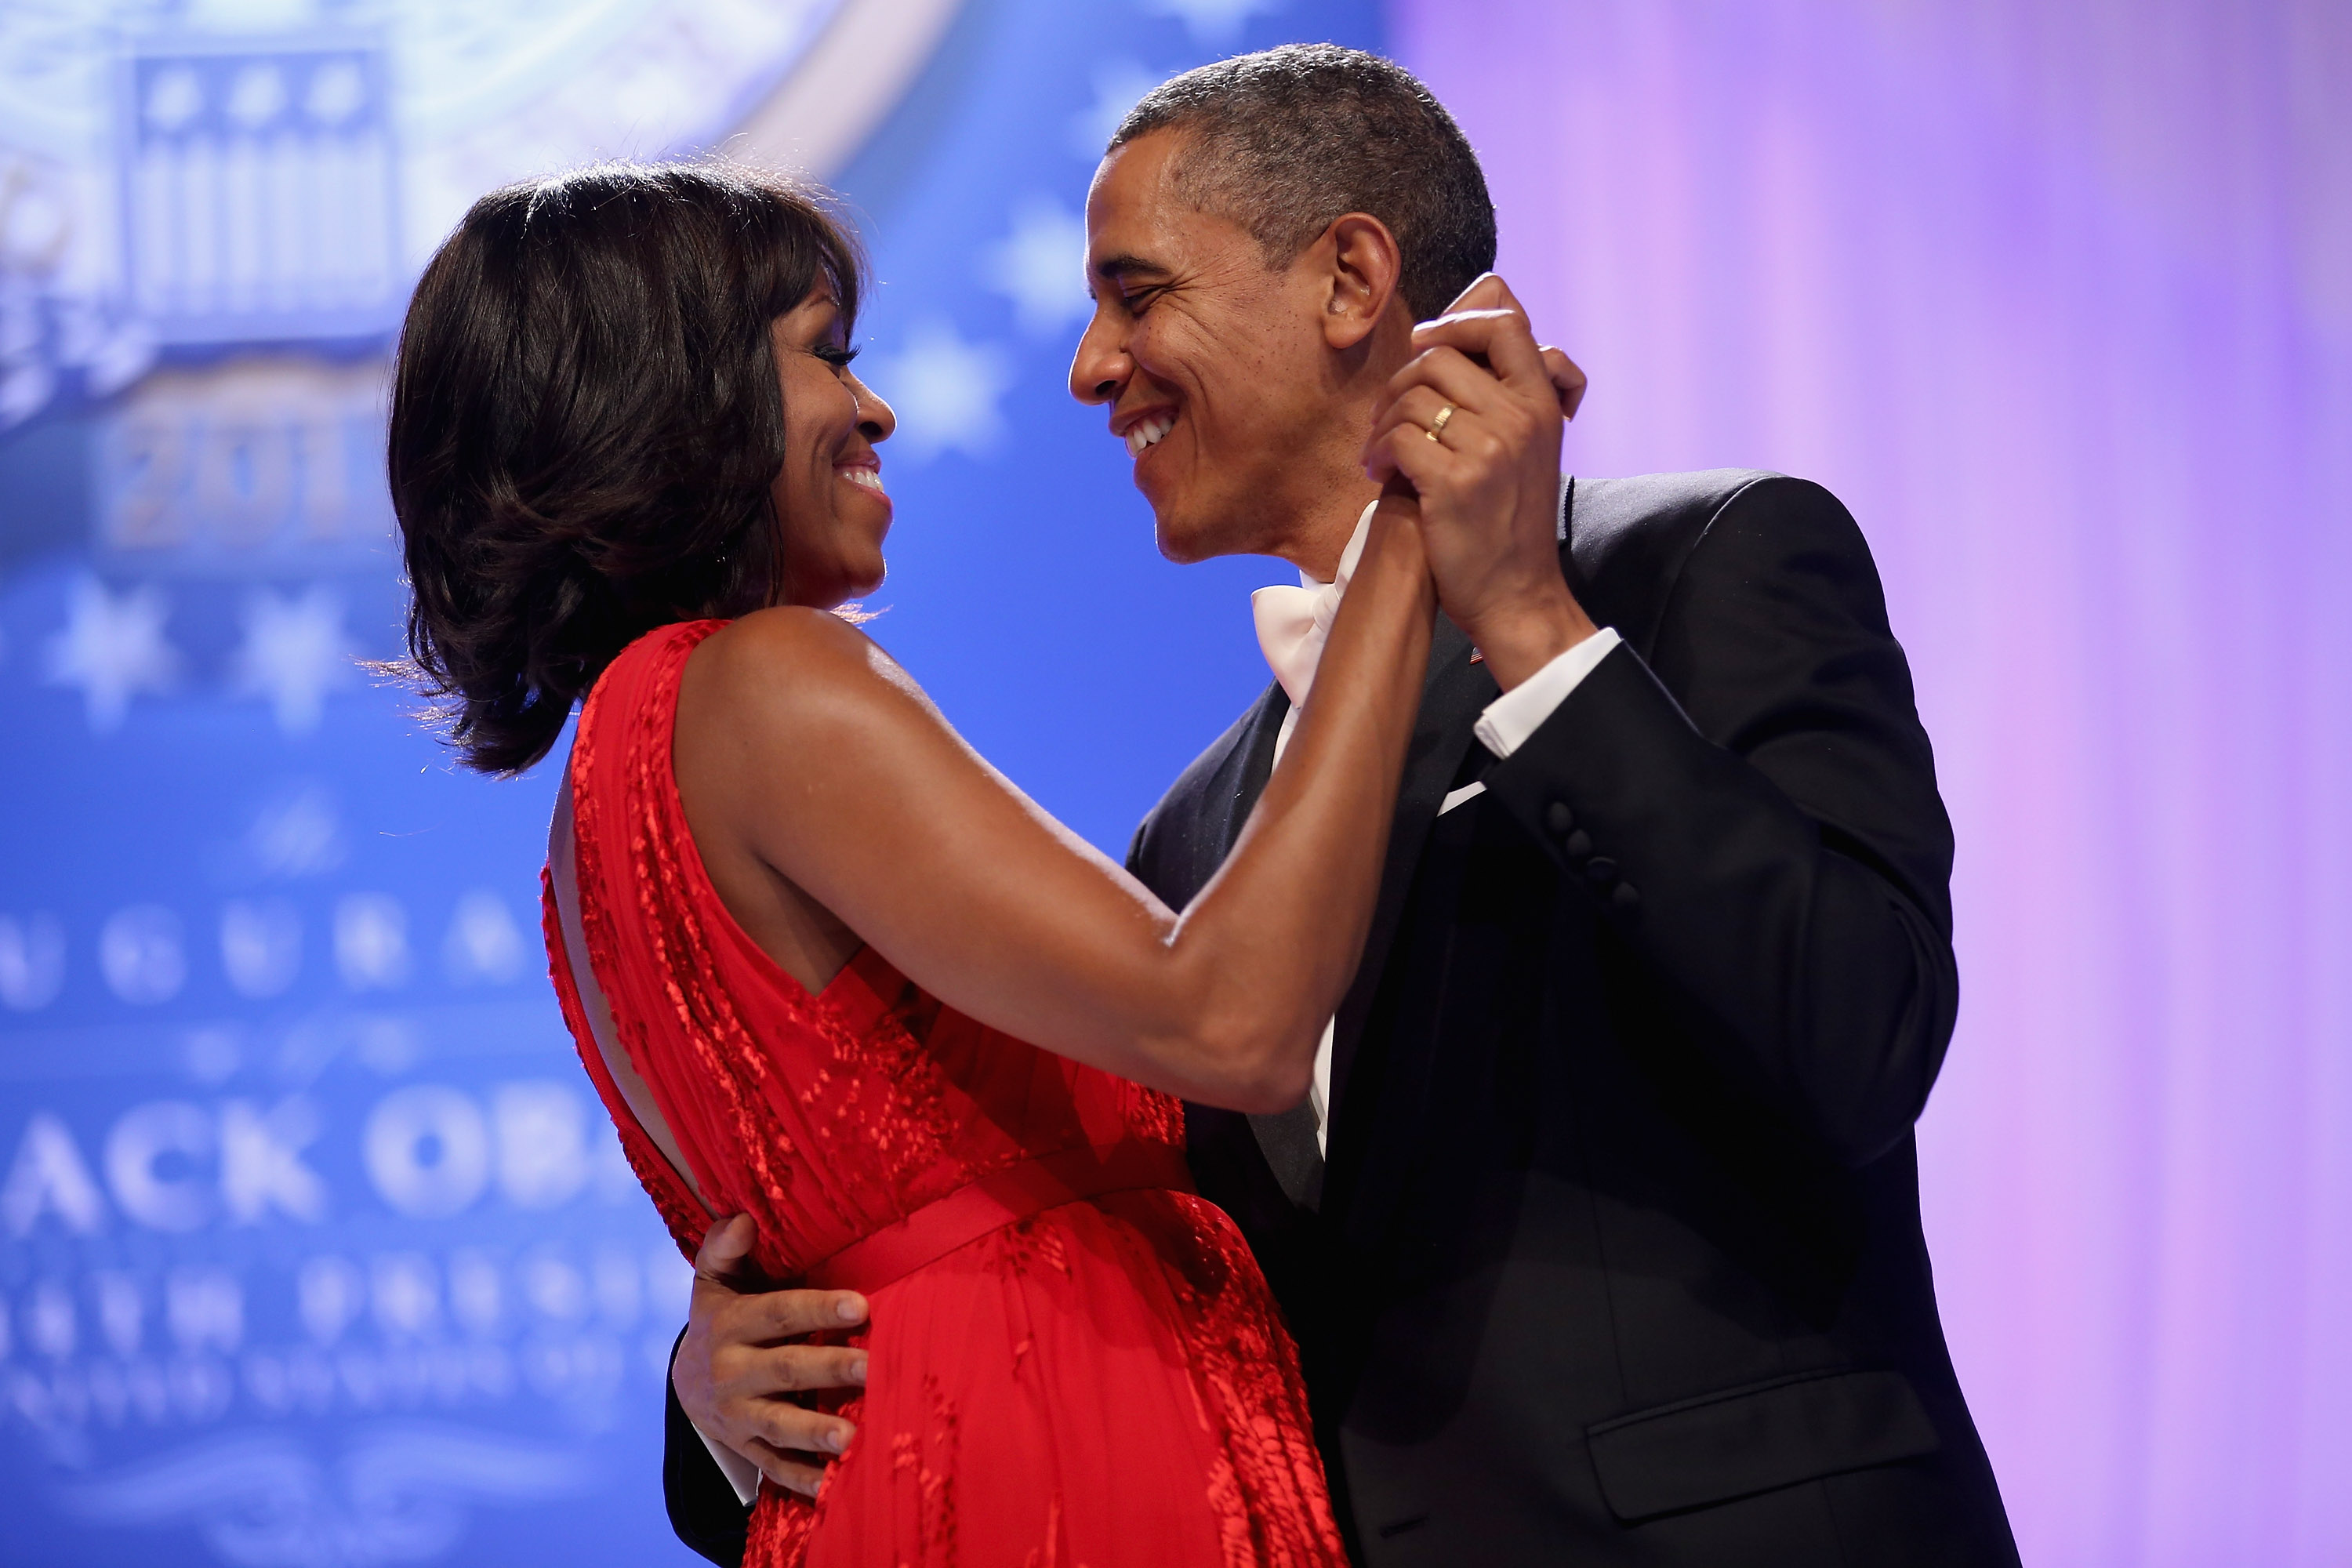 WASHINGTON, DC - JANUARY 21: U.S. President Barack Obama and first lady Michelle Obama dance together during the Comander-in-Chief's Inaugural Ball at the Walter Washington Convention Center January 21, 2013 in Washington, DC. Obama was sworn-in for his second term of office earlier in the day. (Photo by Chip Somodevilla/Getty Images)